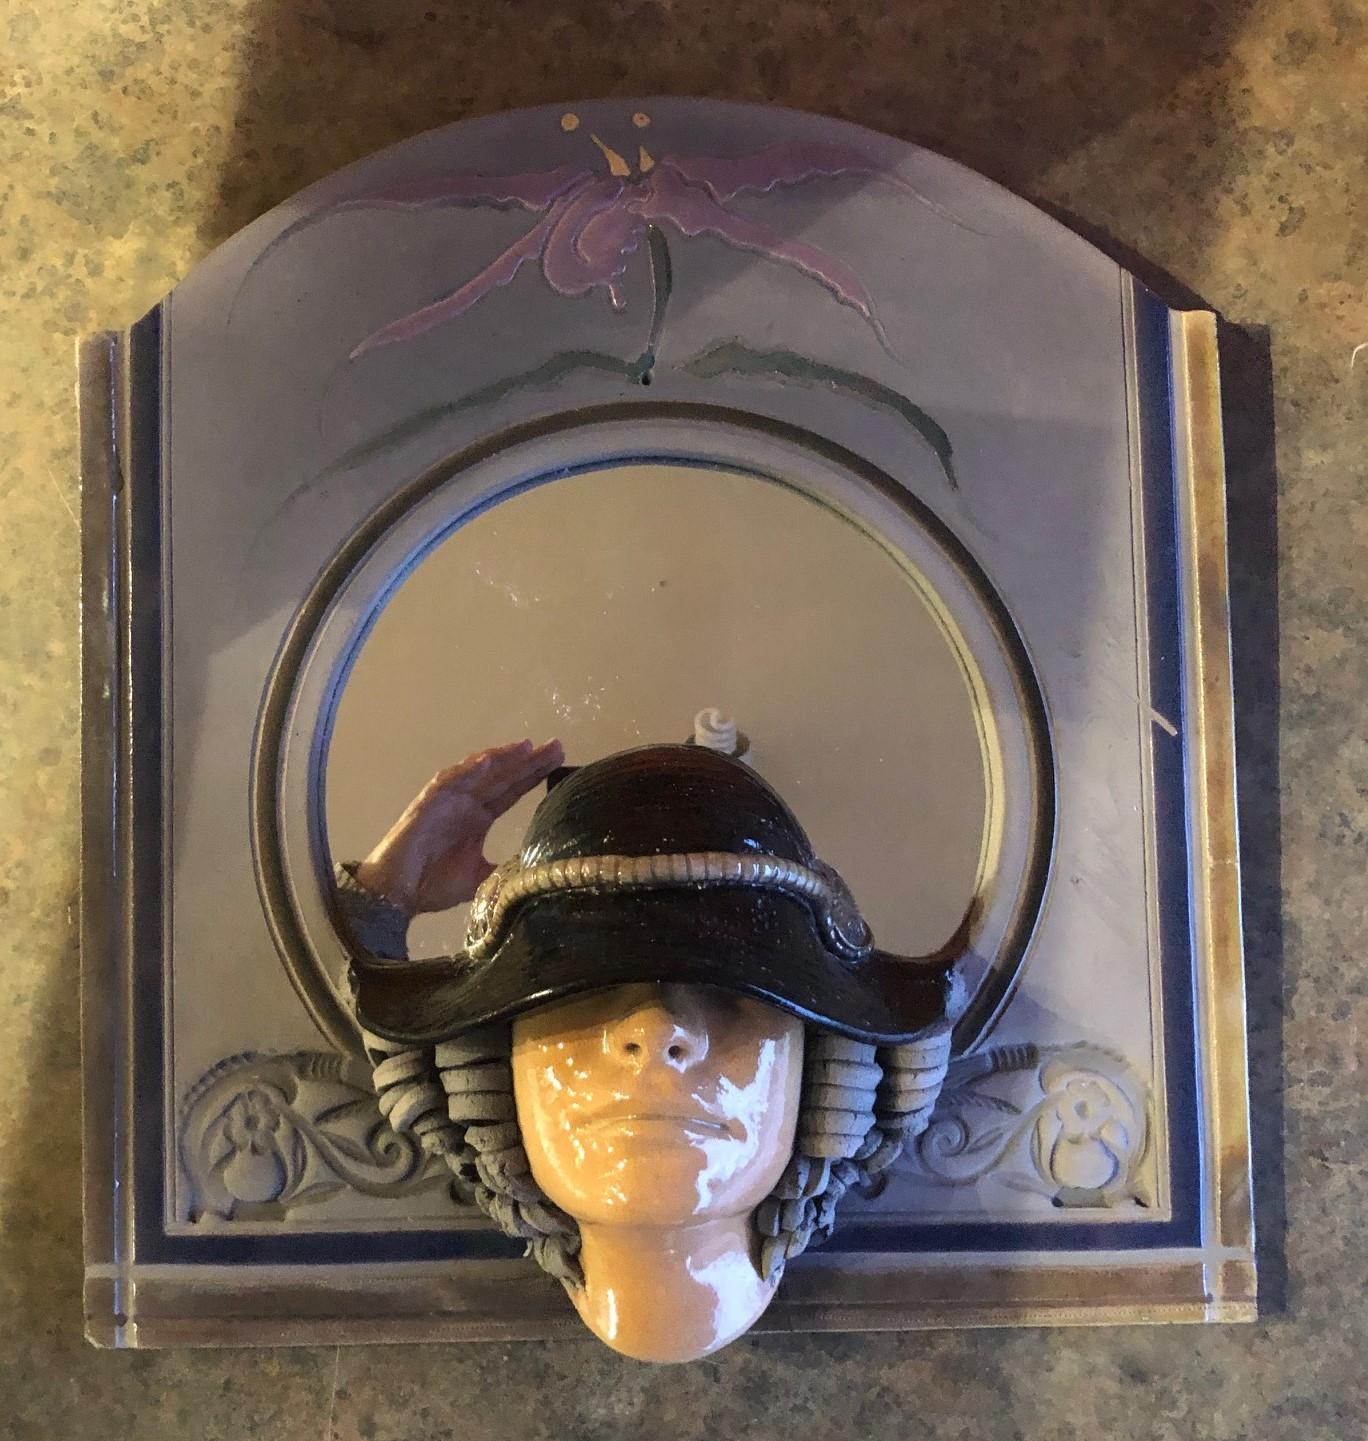 Whimsical raku pottery wall art / mirror with woman's face under a hat signed by Marc Sijan, circa 1980s. The dimensions are 19